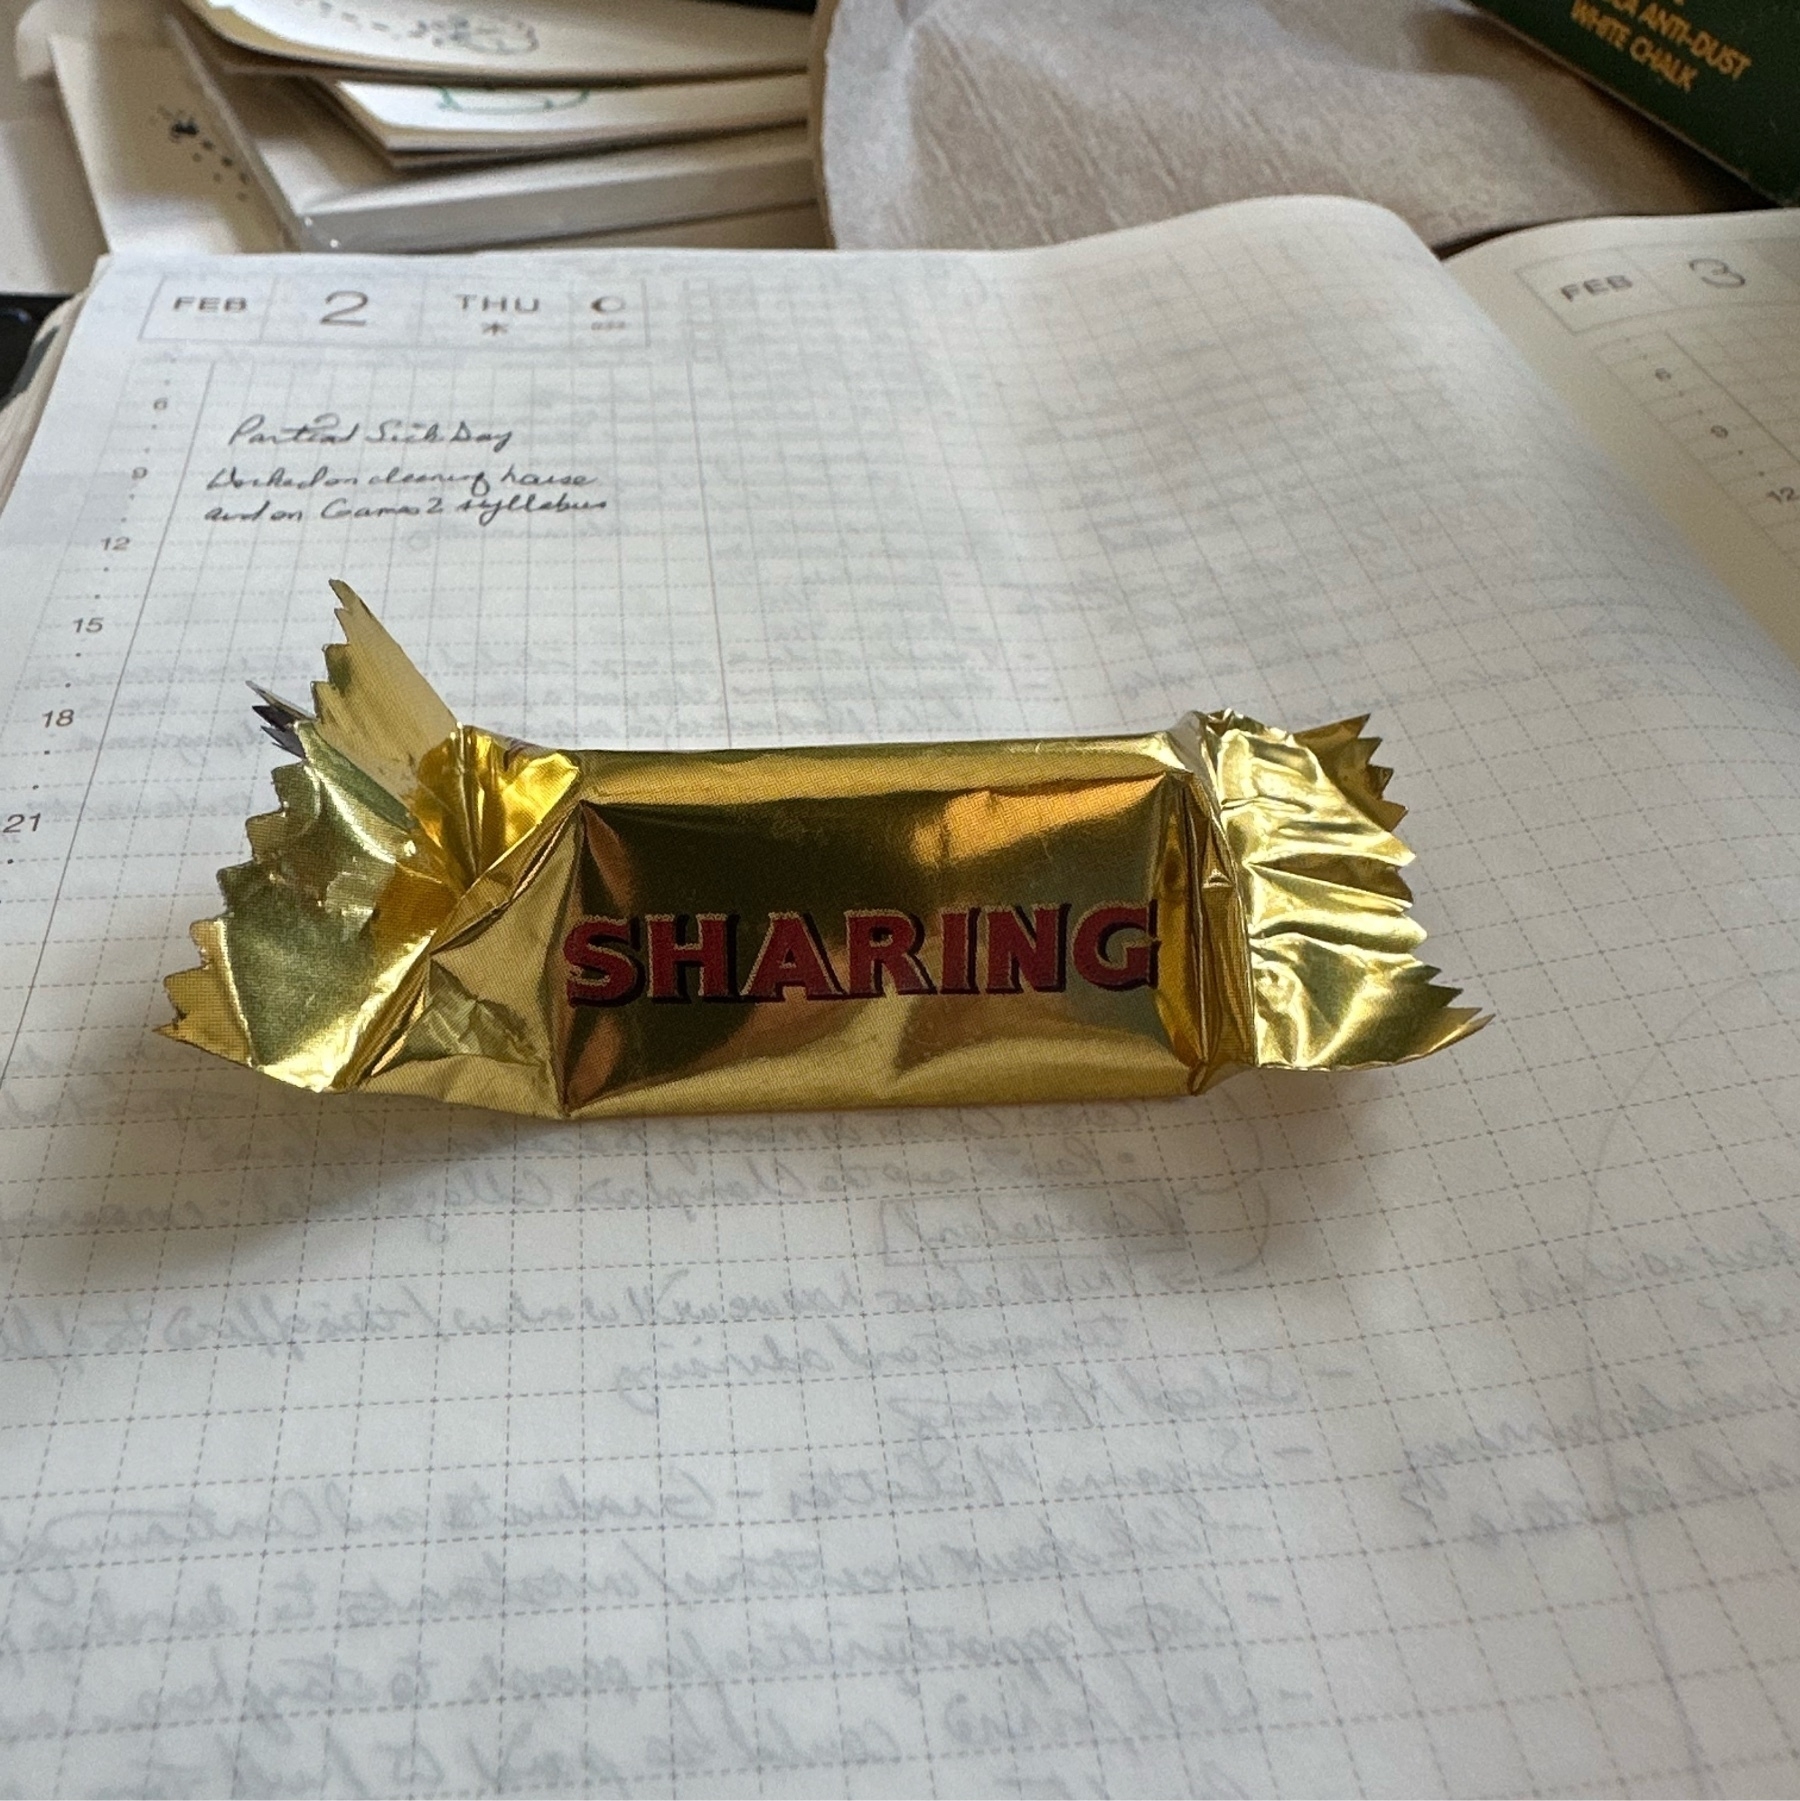 Photograph of a Toblerone chocolate bar in its wrapping on top of an open notebook